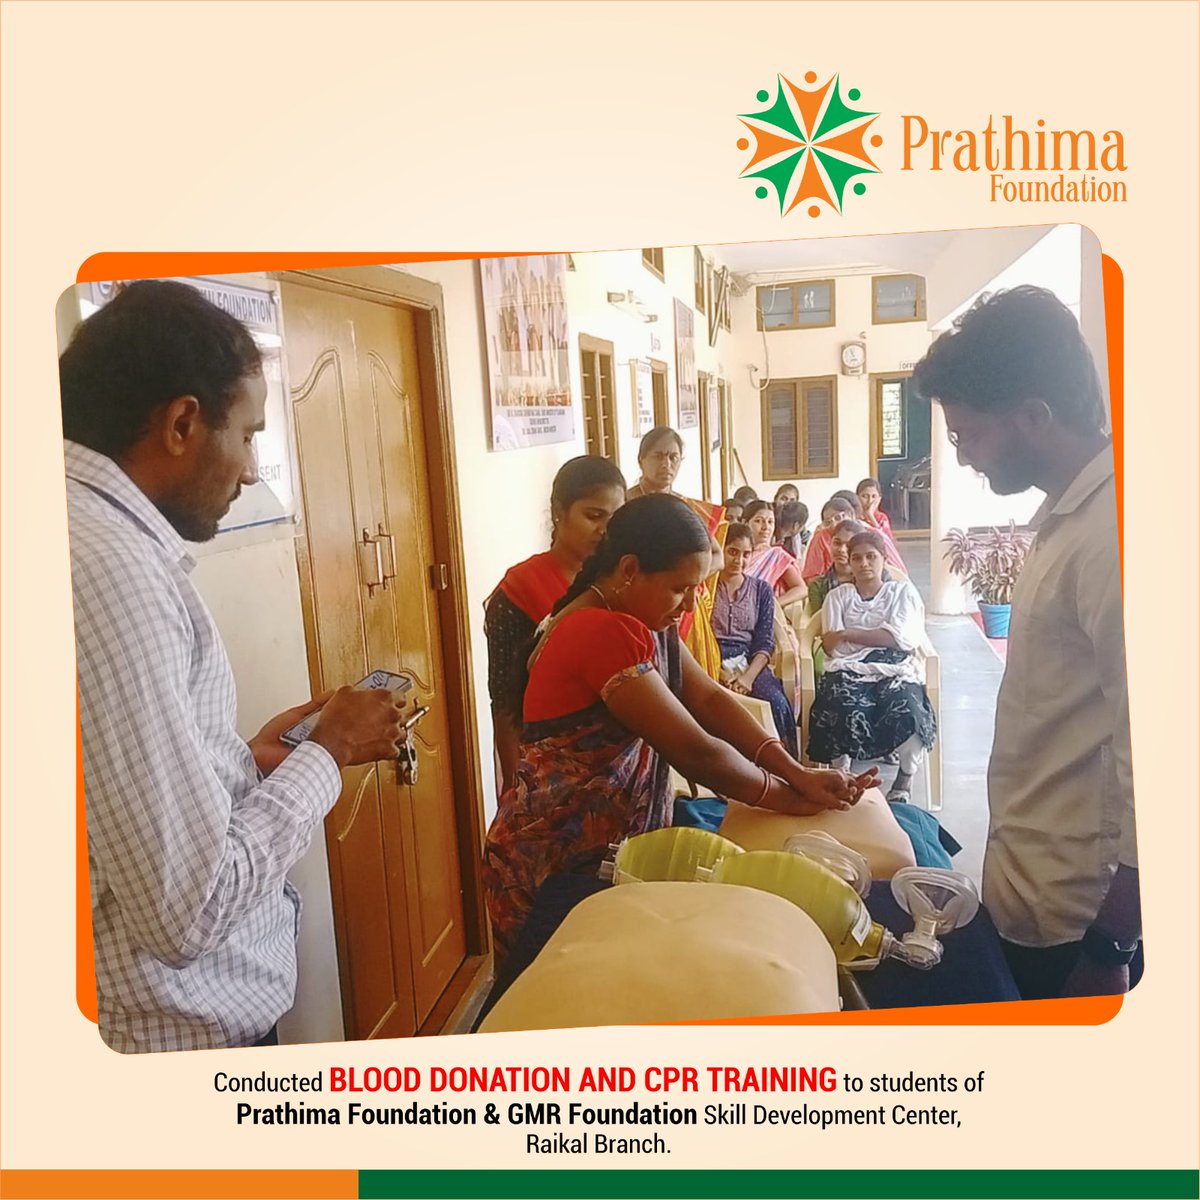 BLOOD DONATION AND CPR TRAINING Conducted to students of Prathima Foundation & GMR Foundation Skill Development Center, Raikal Branch

#Blooddonation #blooddonationsession #traingsession #trainingsession #freesession #CPRtraining #blooddonationcamp #Raikal #Prathimafoundation #pf